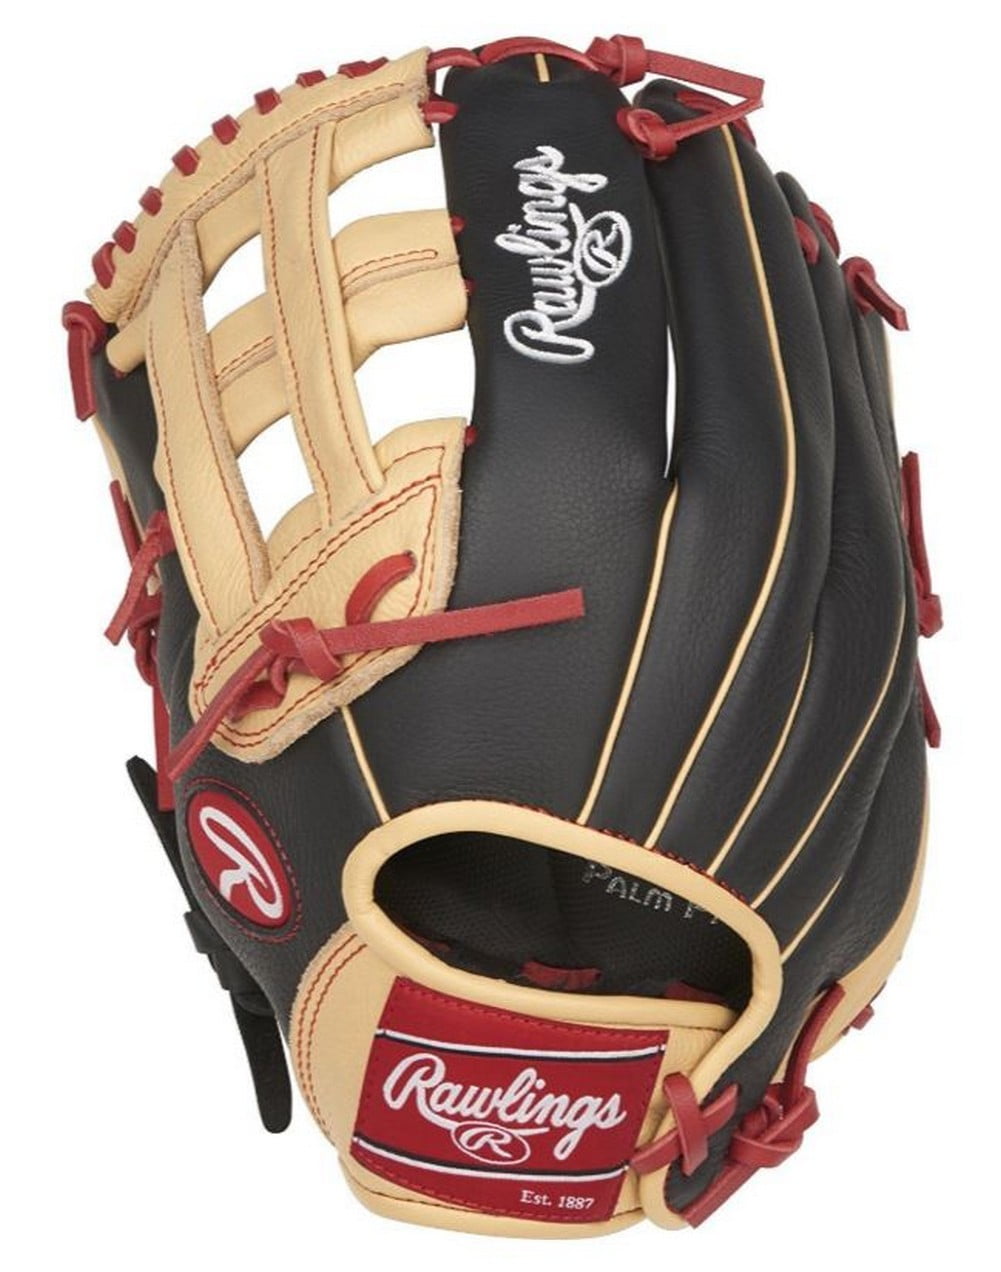 Rawlings Heart of the New York Mets Baseball Glove 11.5 Right Hand Throw